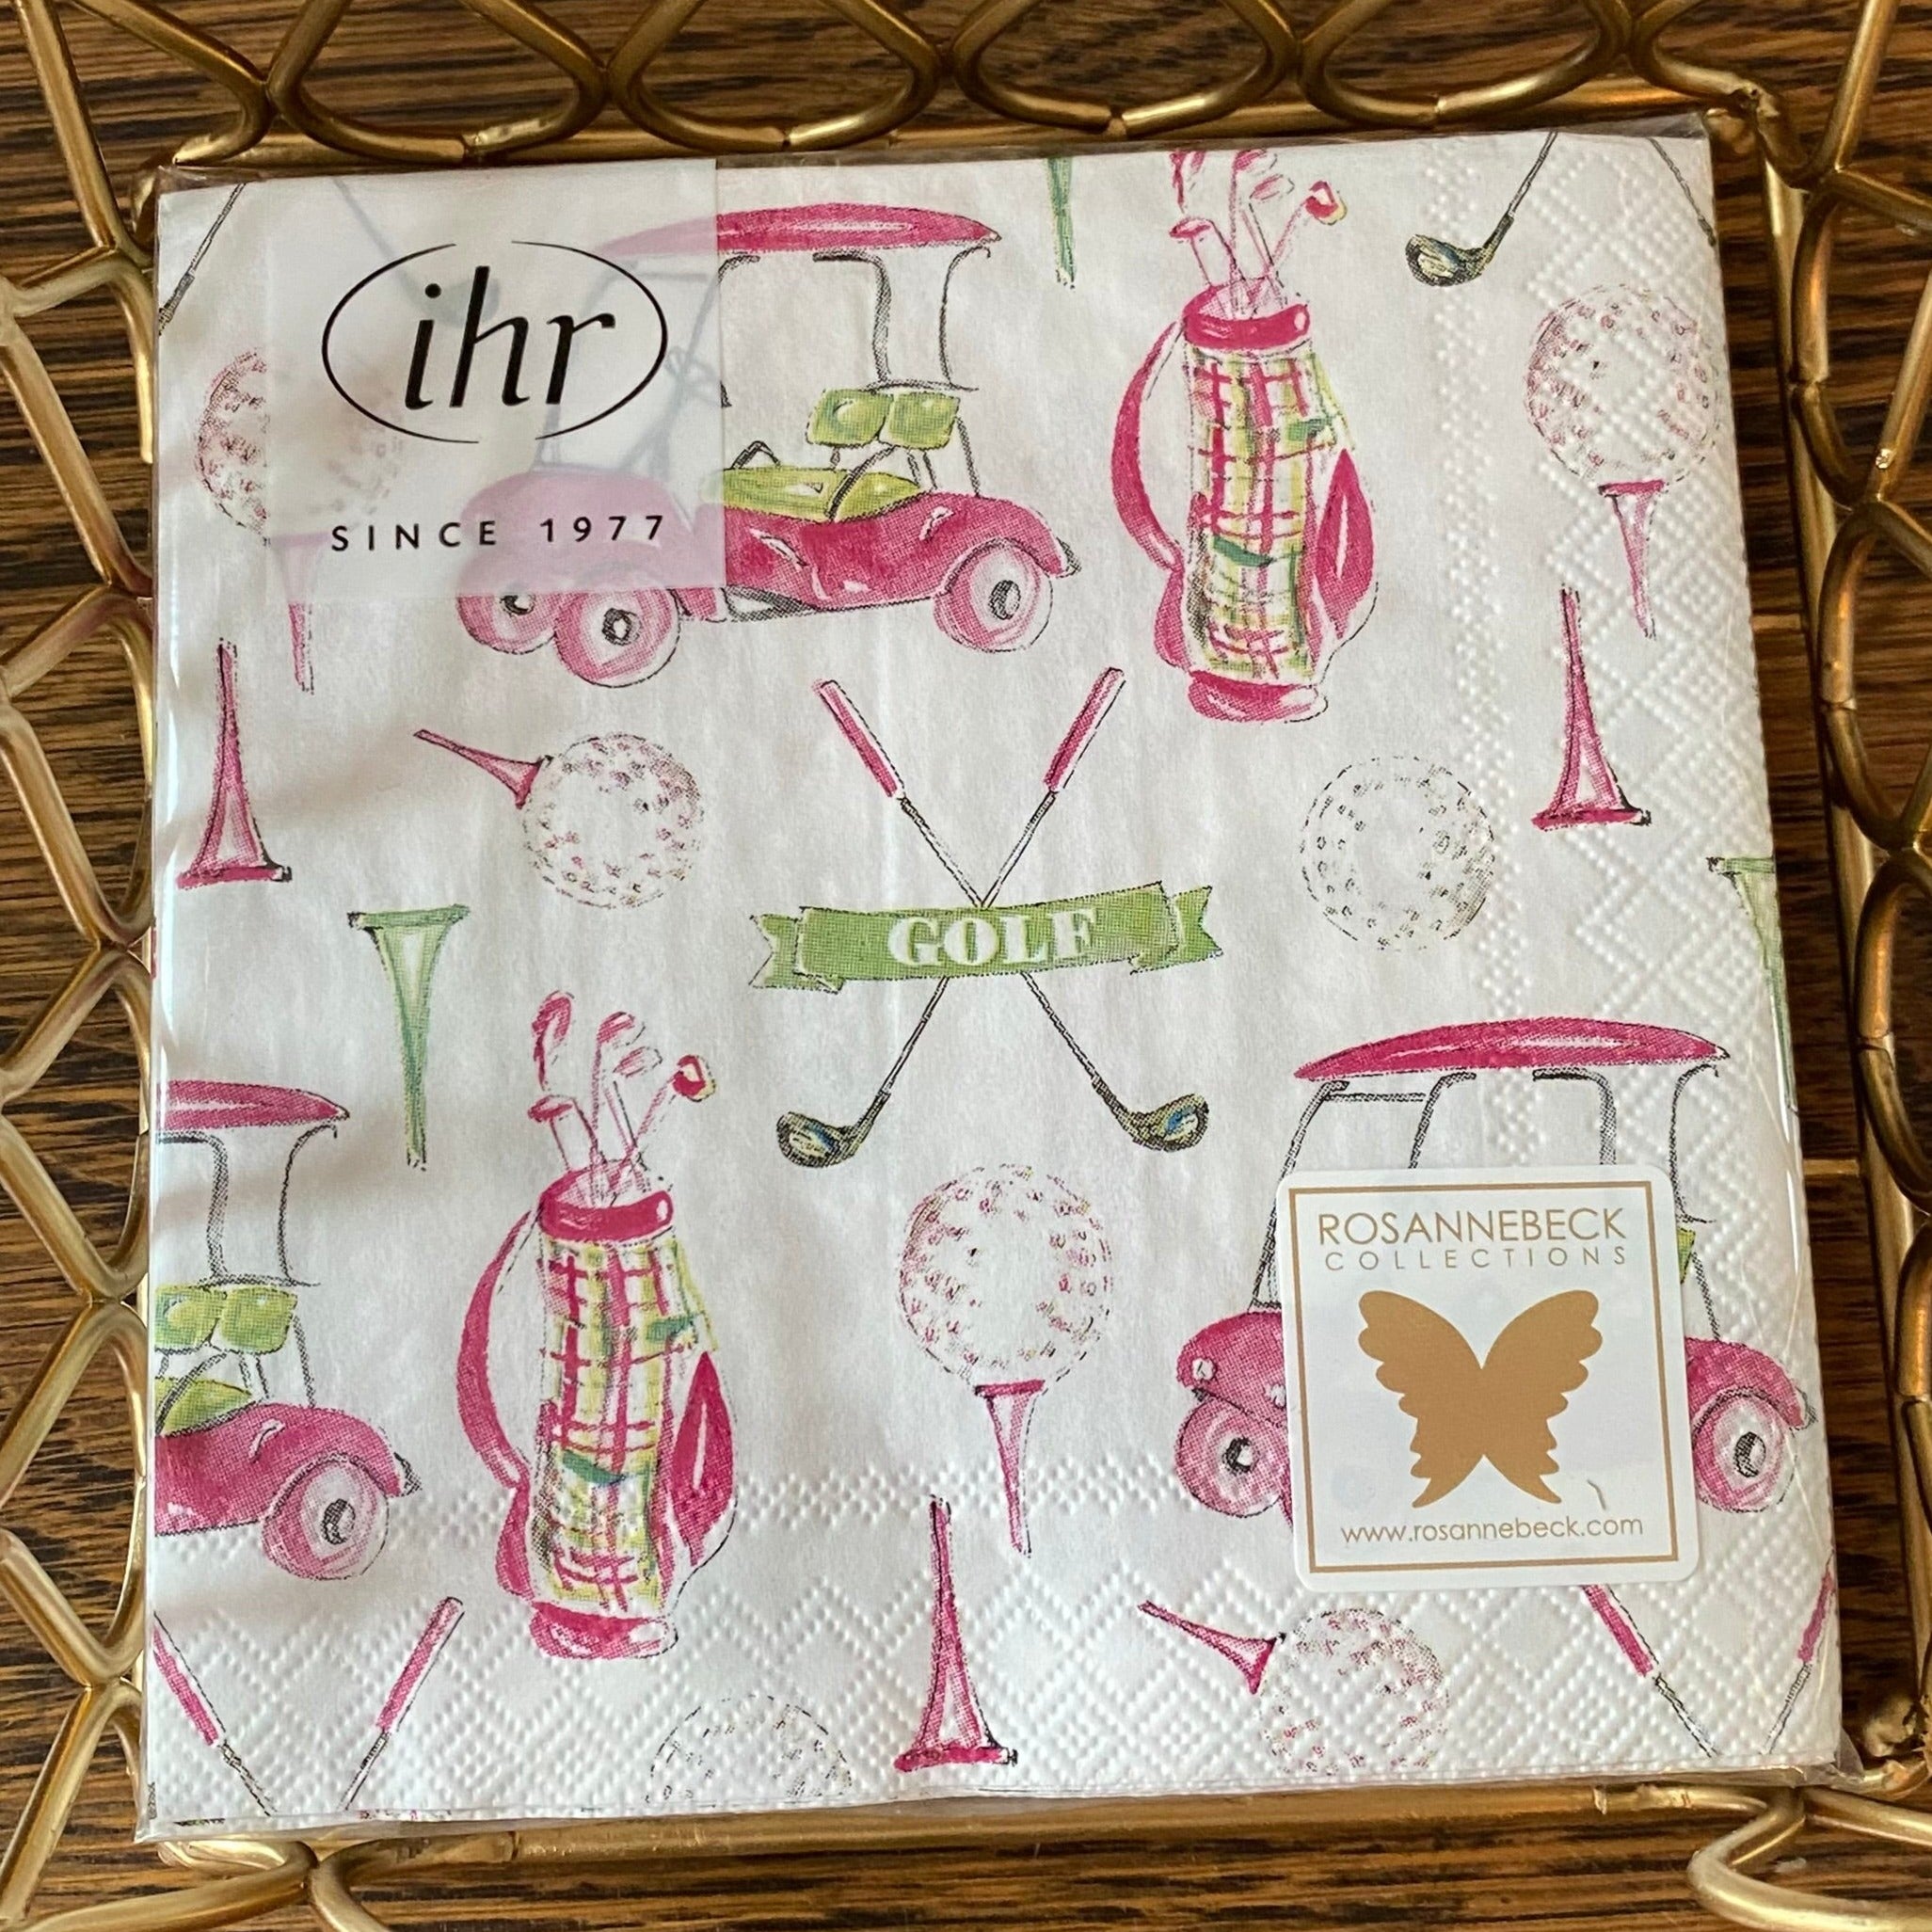 Cute golf themed cocktail napkins in a fun green and hot pink. Images include cute golf cart, tees, clubs and adorable plaid golf bag.